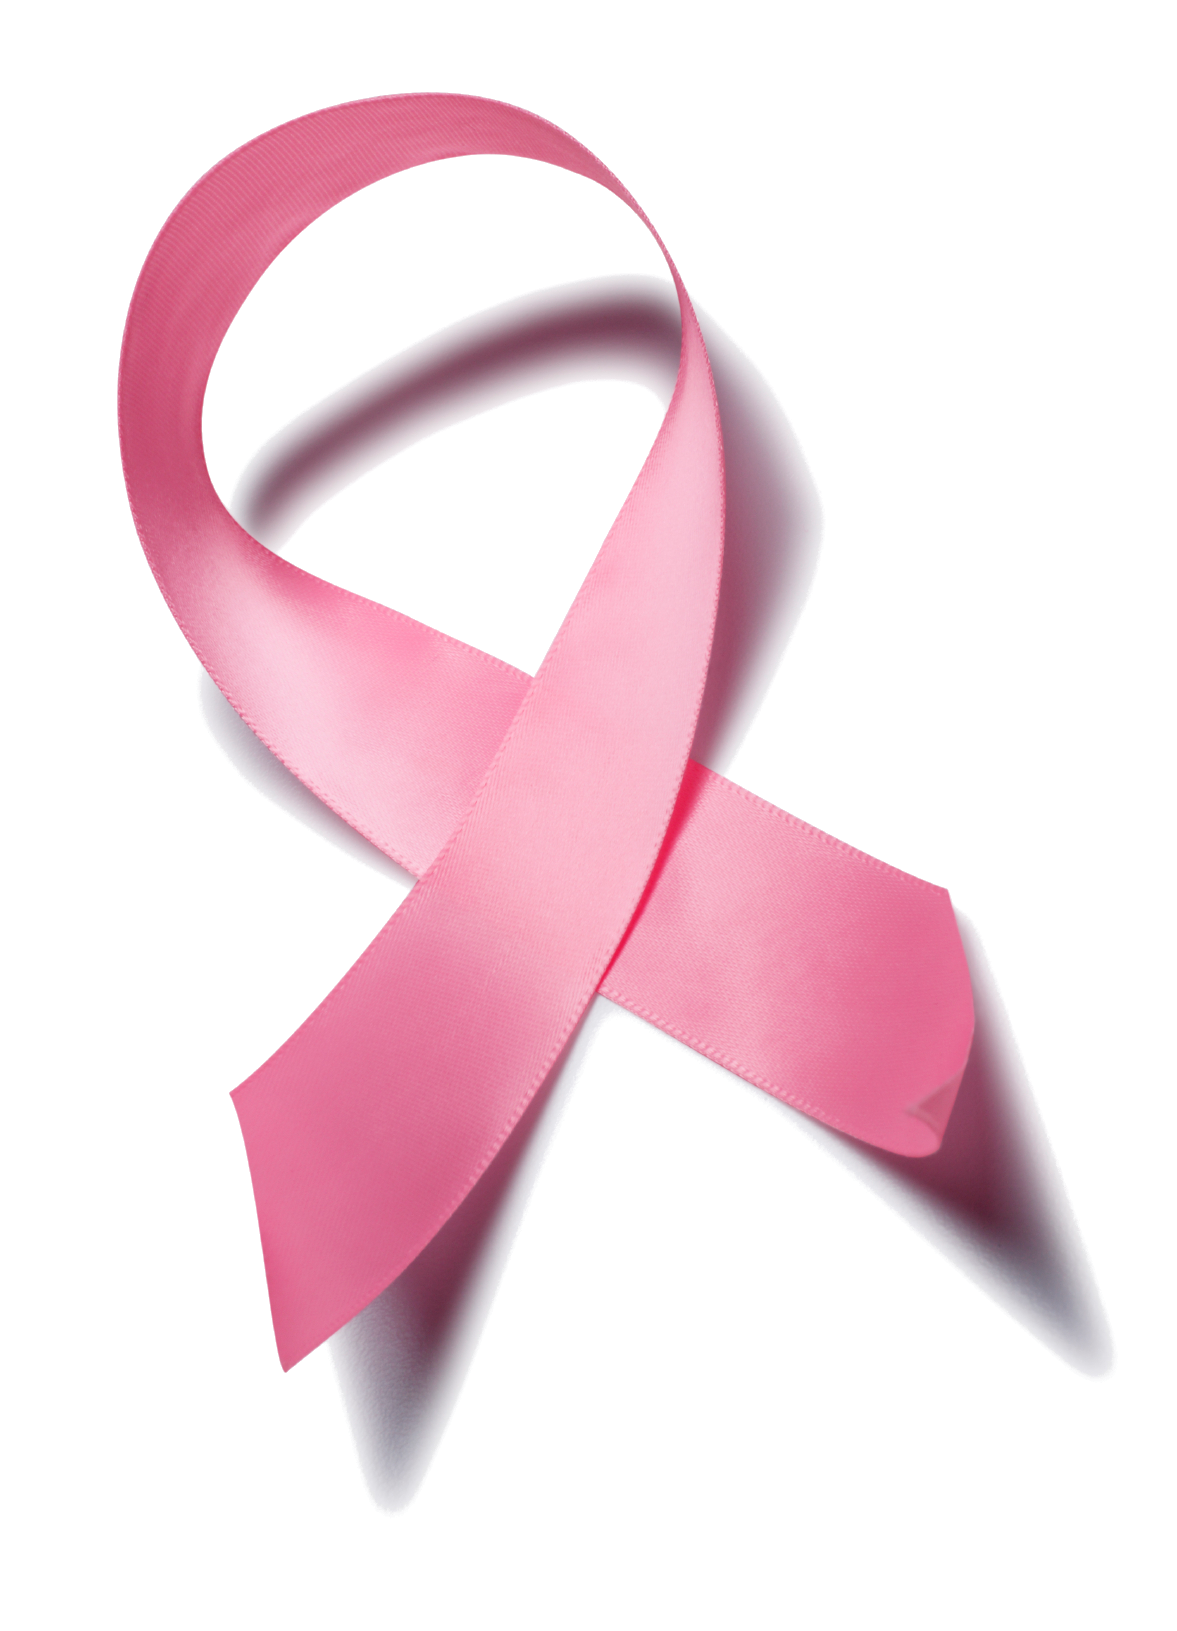 Cancer Ribbon PNG Clipart Background